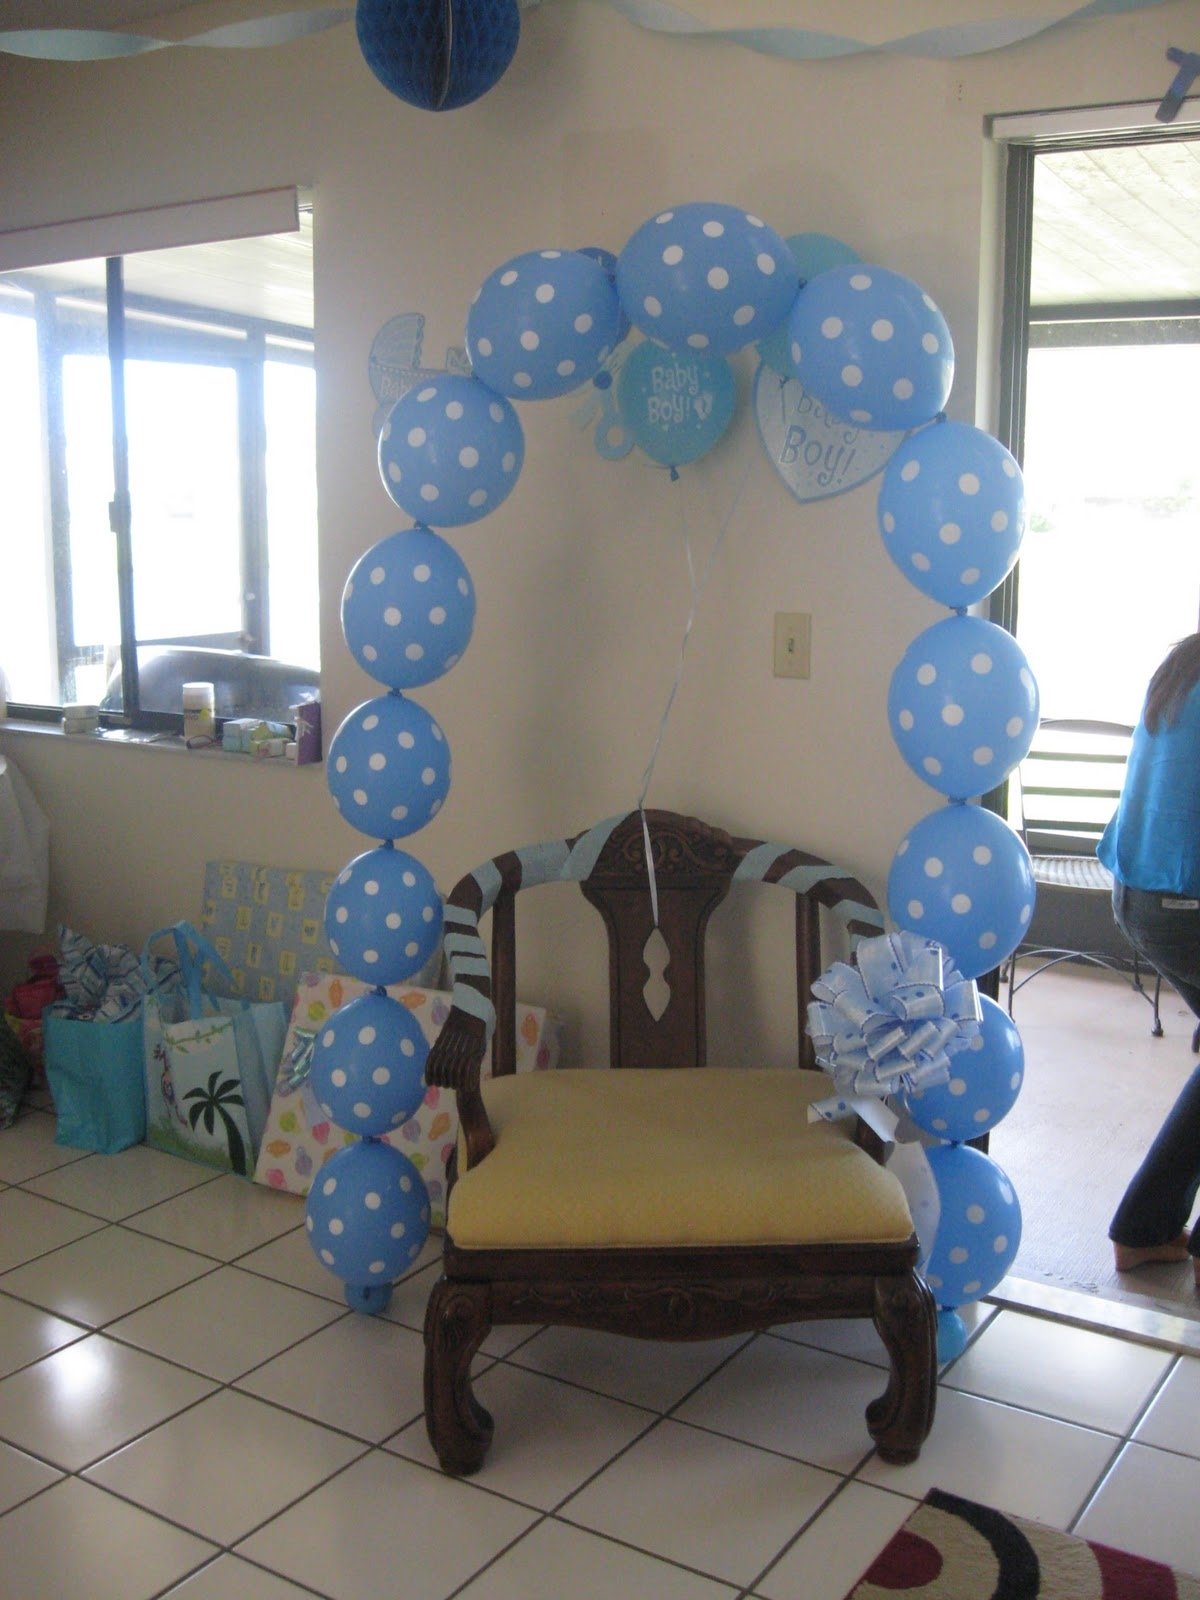 10 Fantastic Baby Shower Chair Decoration Ideas baby shower chair decoration ideas wonderful cover with crochet 2022